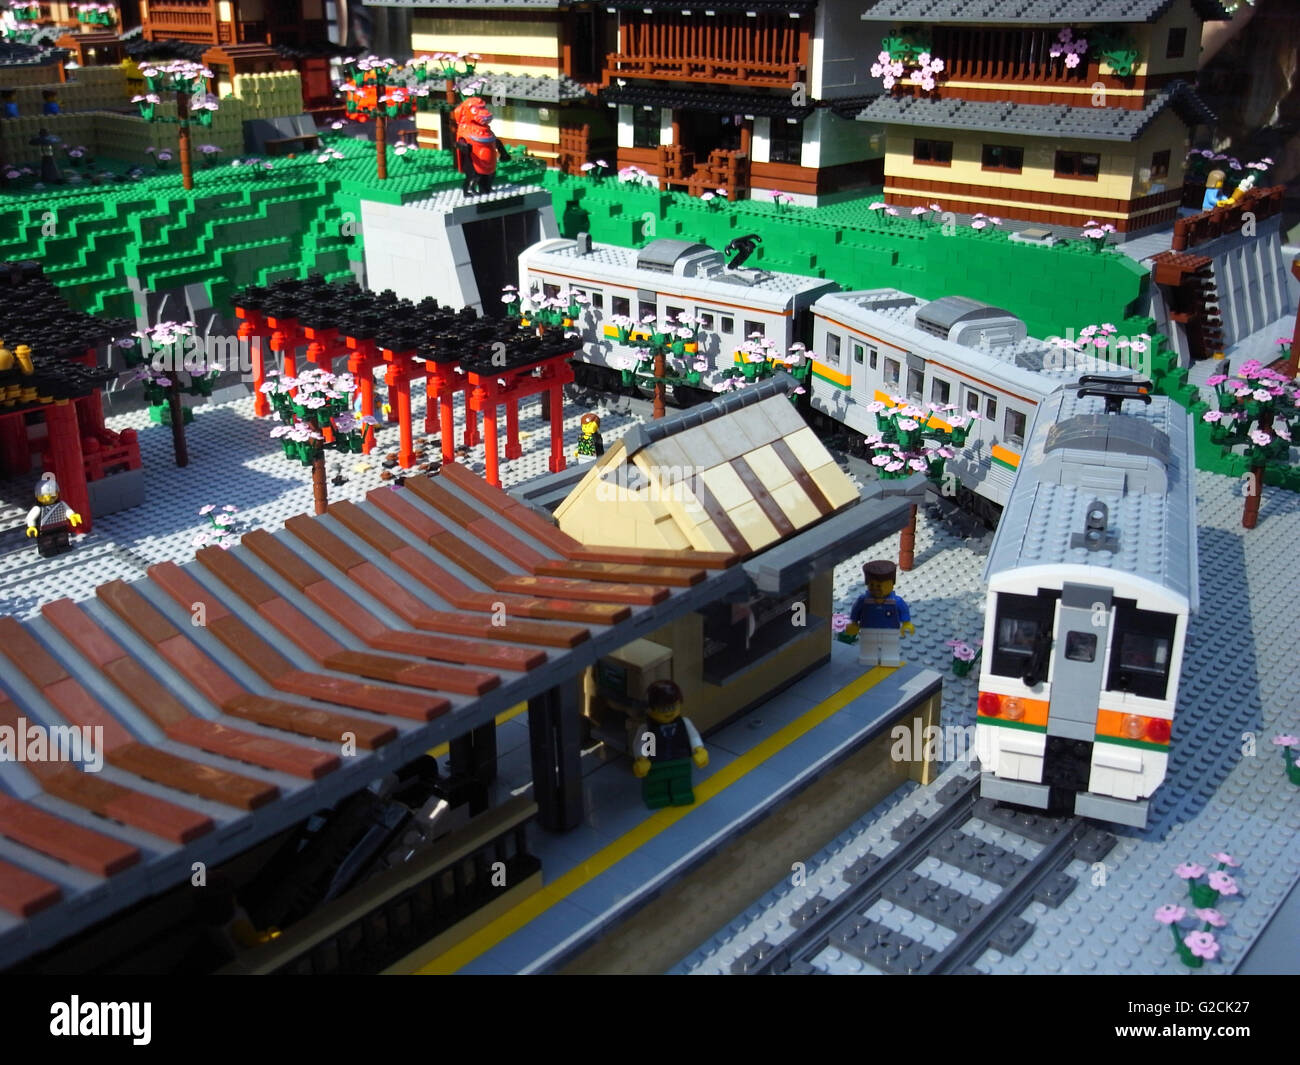 Lego Train Station High Resolution Stock Photography and Images - Alamy